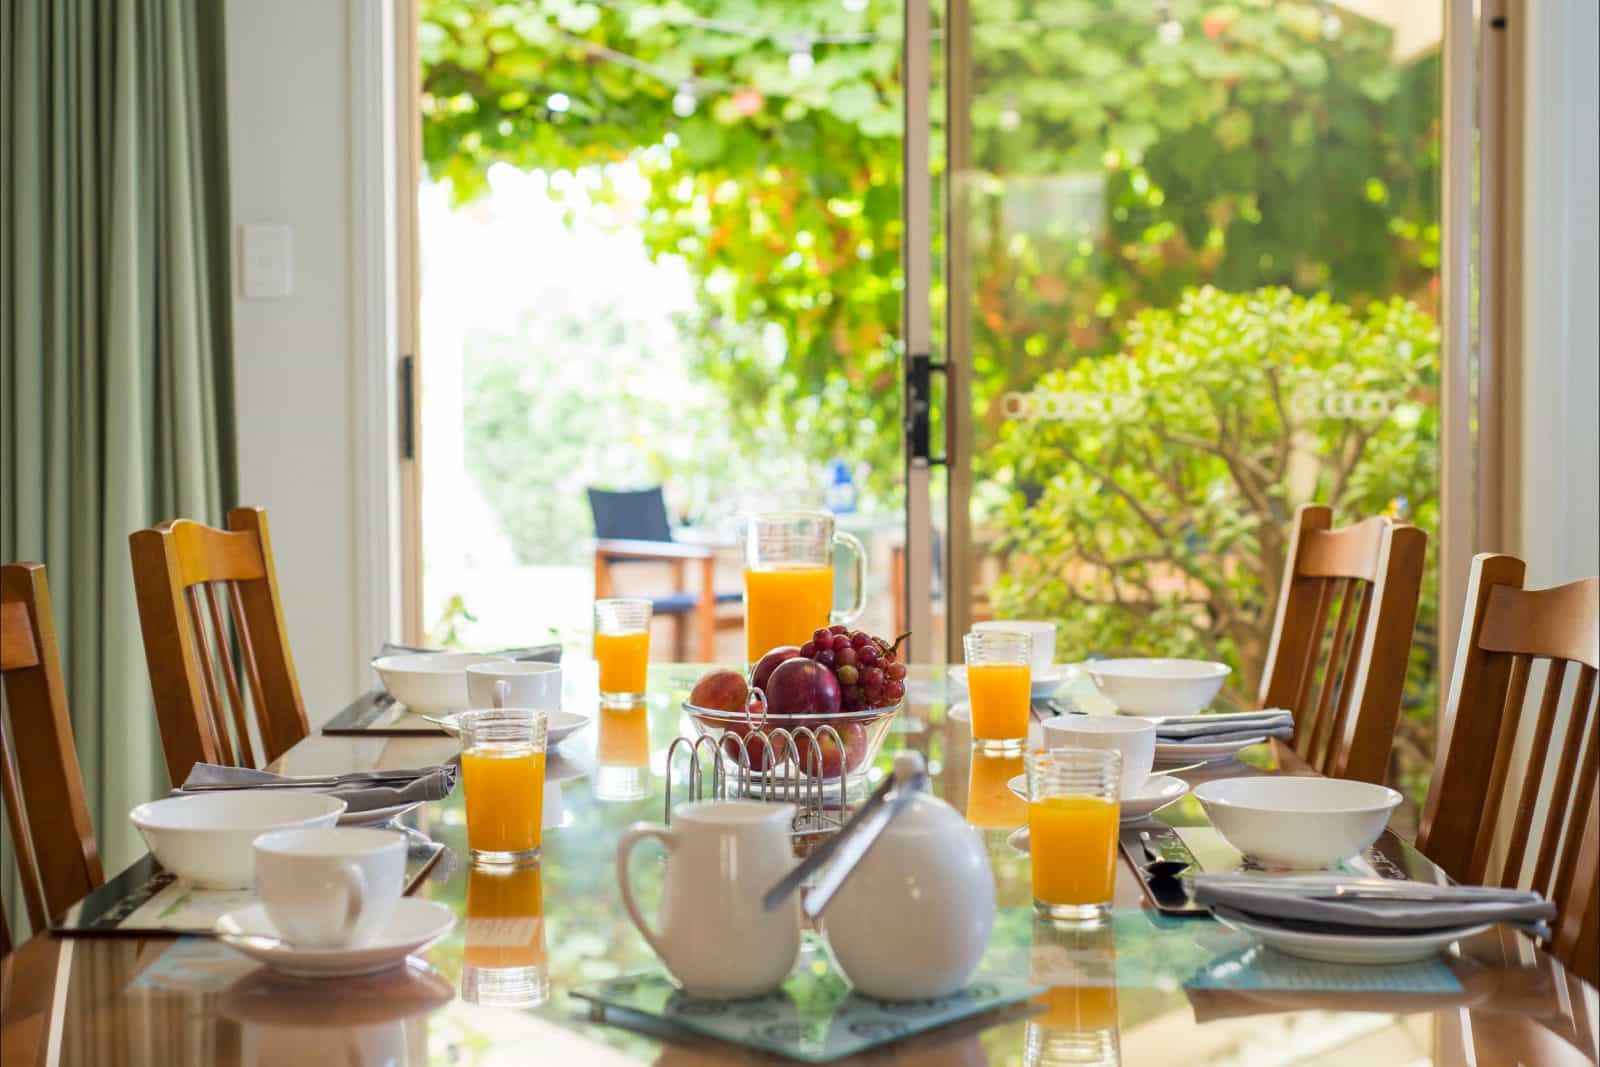 Guest Table set for breakfast